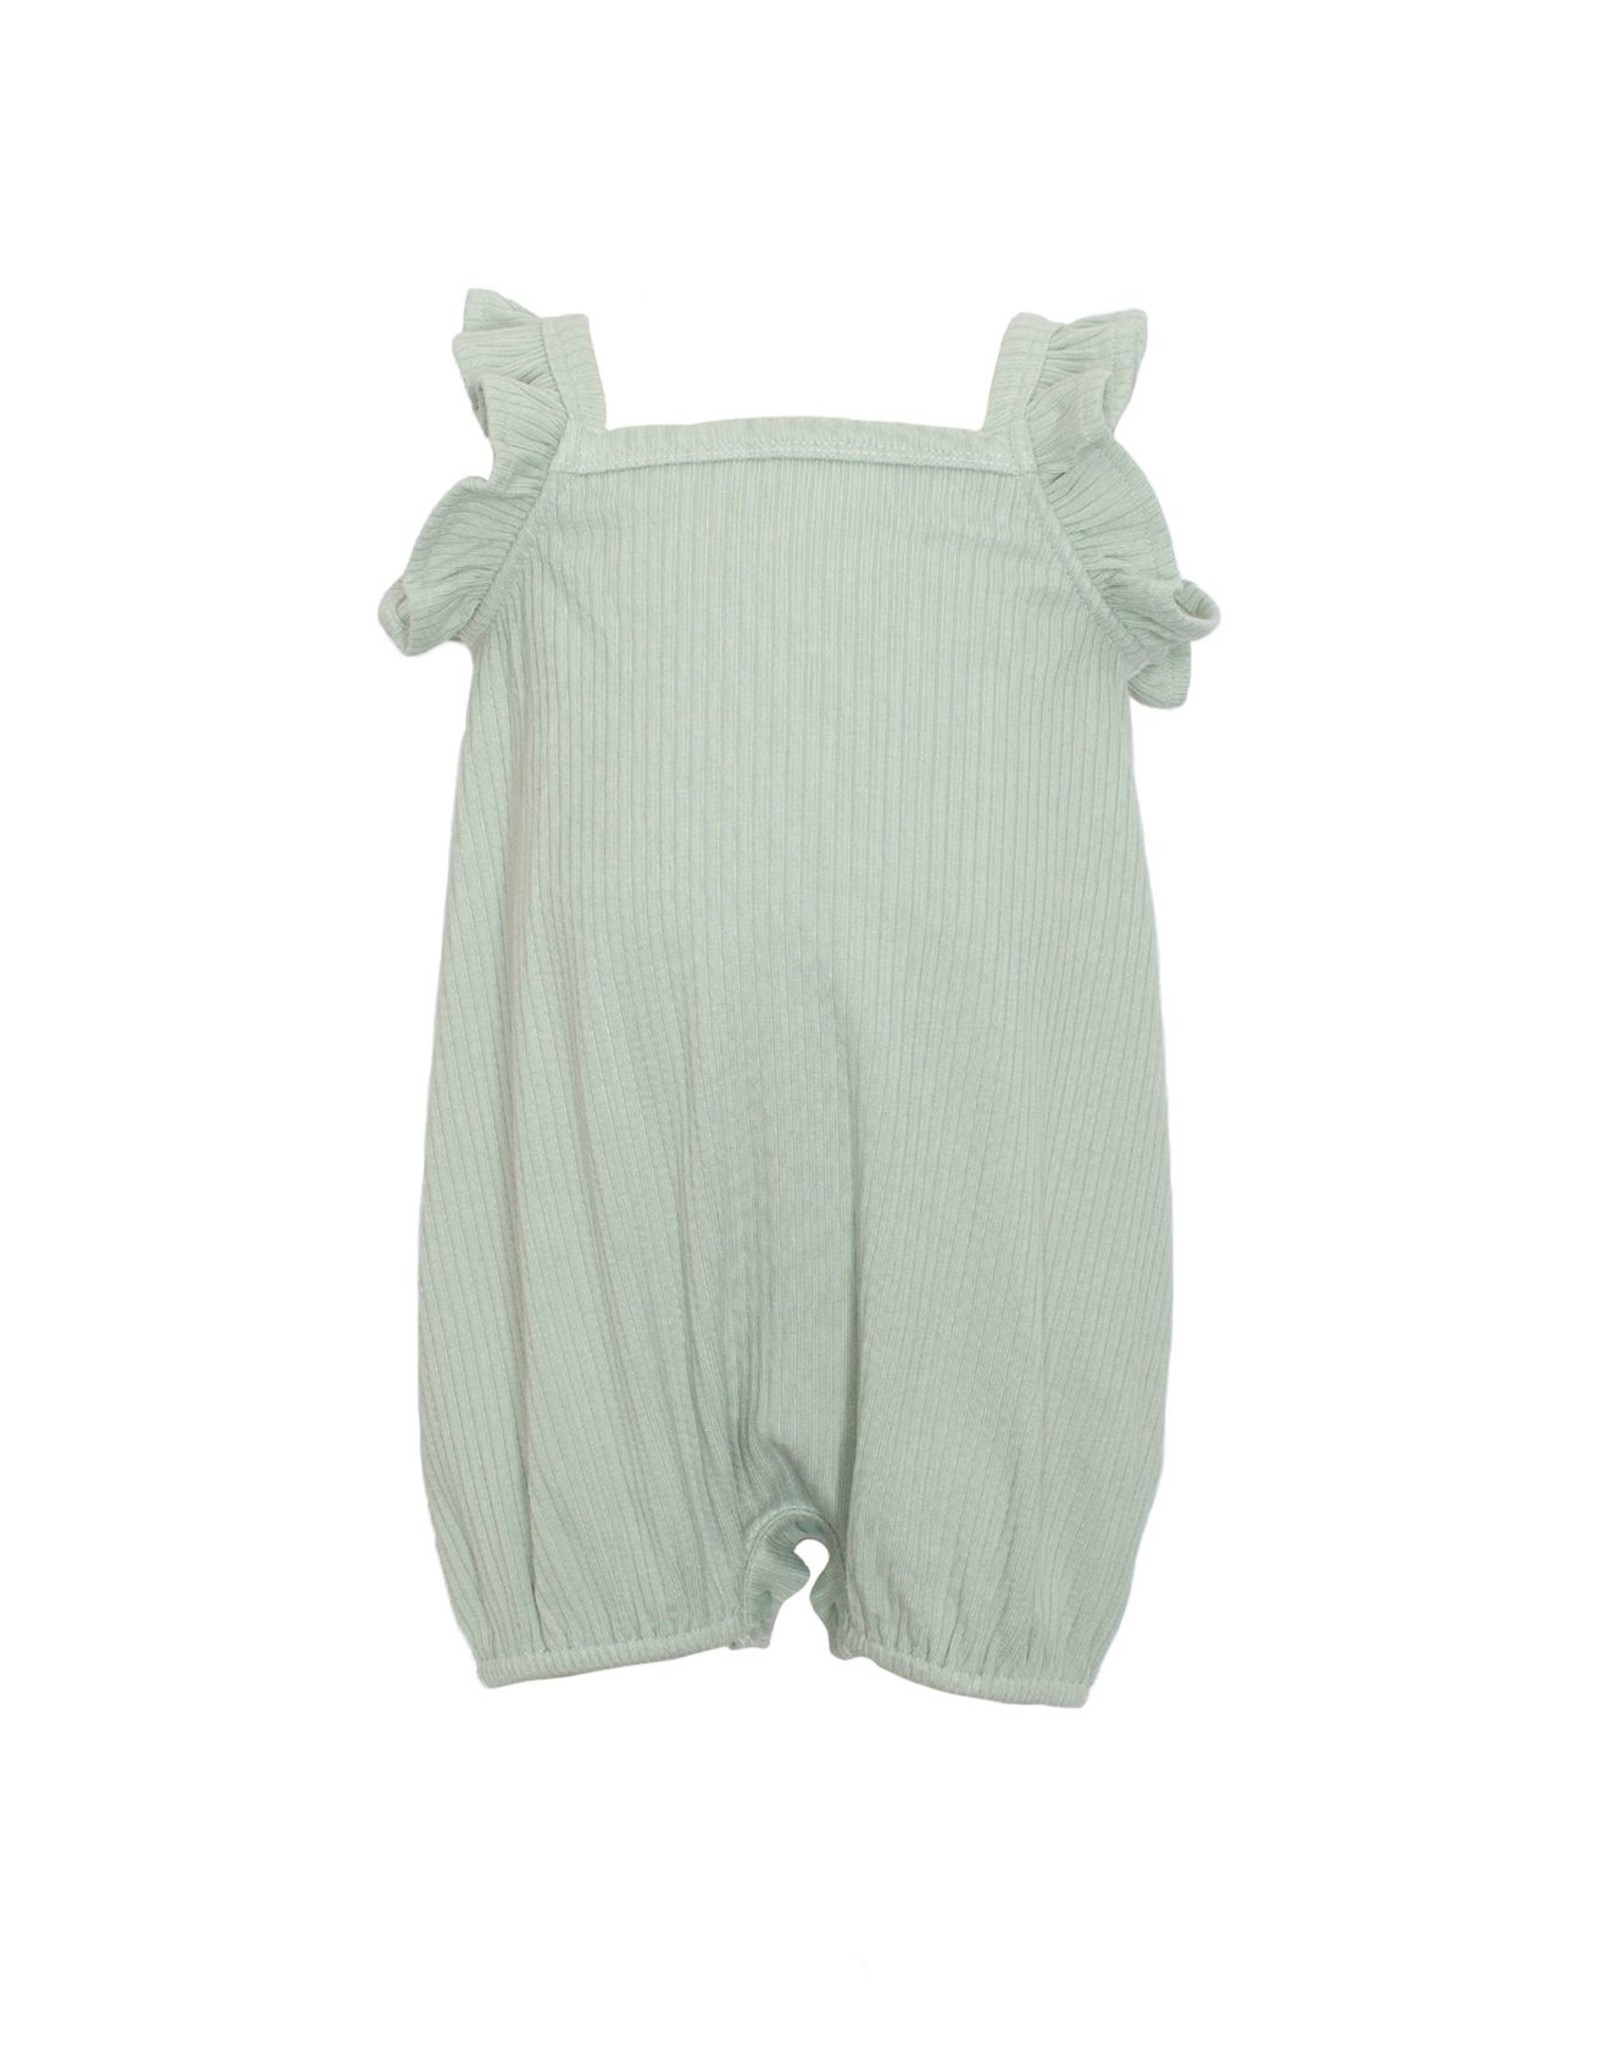 Mabel and Honey In The Meadows  Knit Romper~Aqua